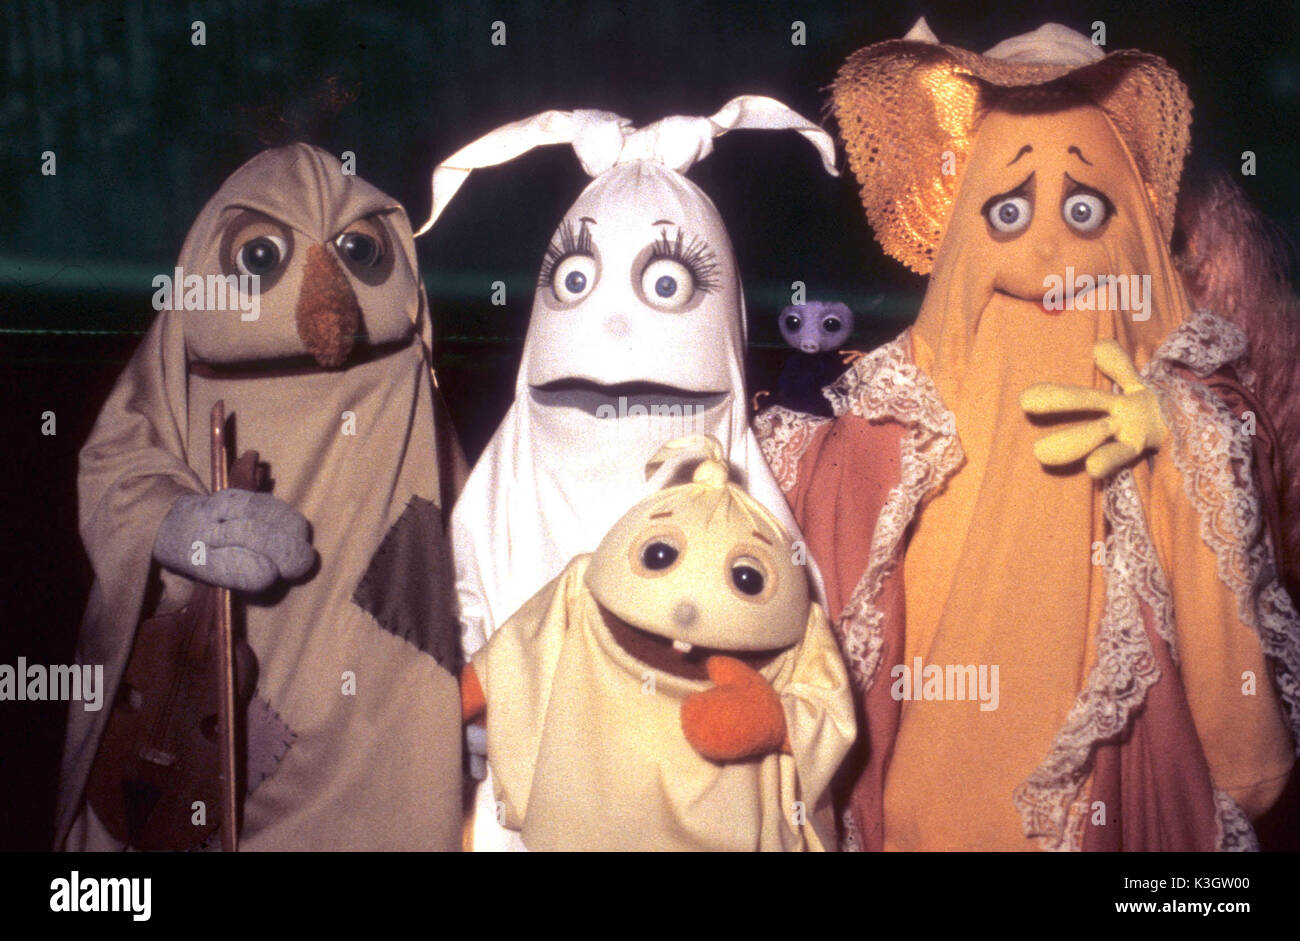 THE SPOOKS OF BOTTLE BAY [BR 1992] *** Local Caption *** CHILDREN'S TELEVISION PUPPET SHOW CREATED BY IAN ALLEN AND JOHN THIRTLE THE SPOOKS OF BOTTLE BAY     Date: 1992 Stock Photo